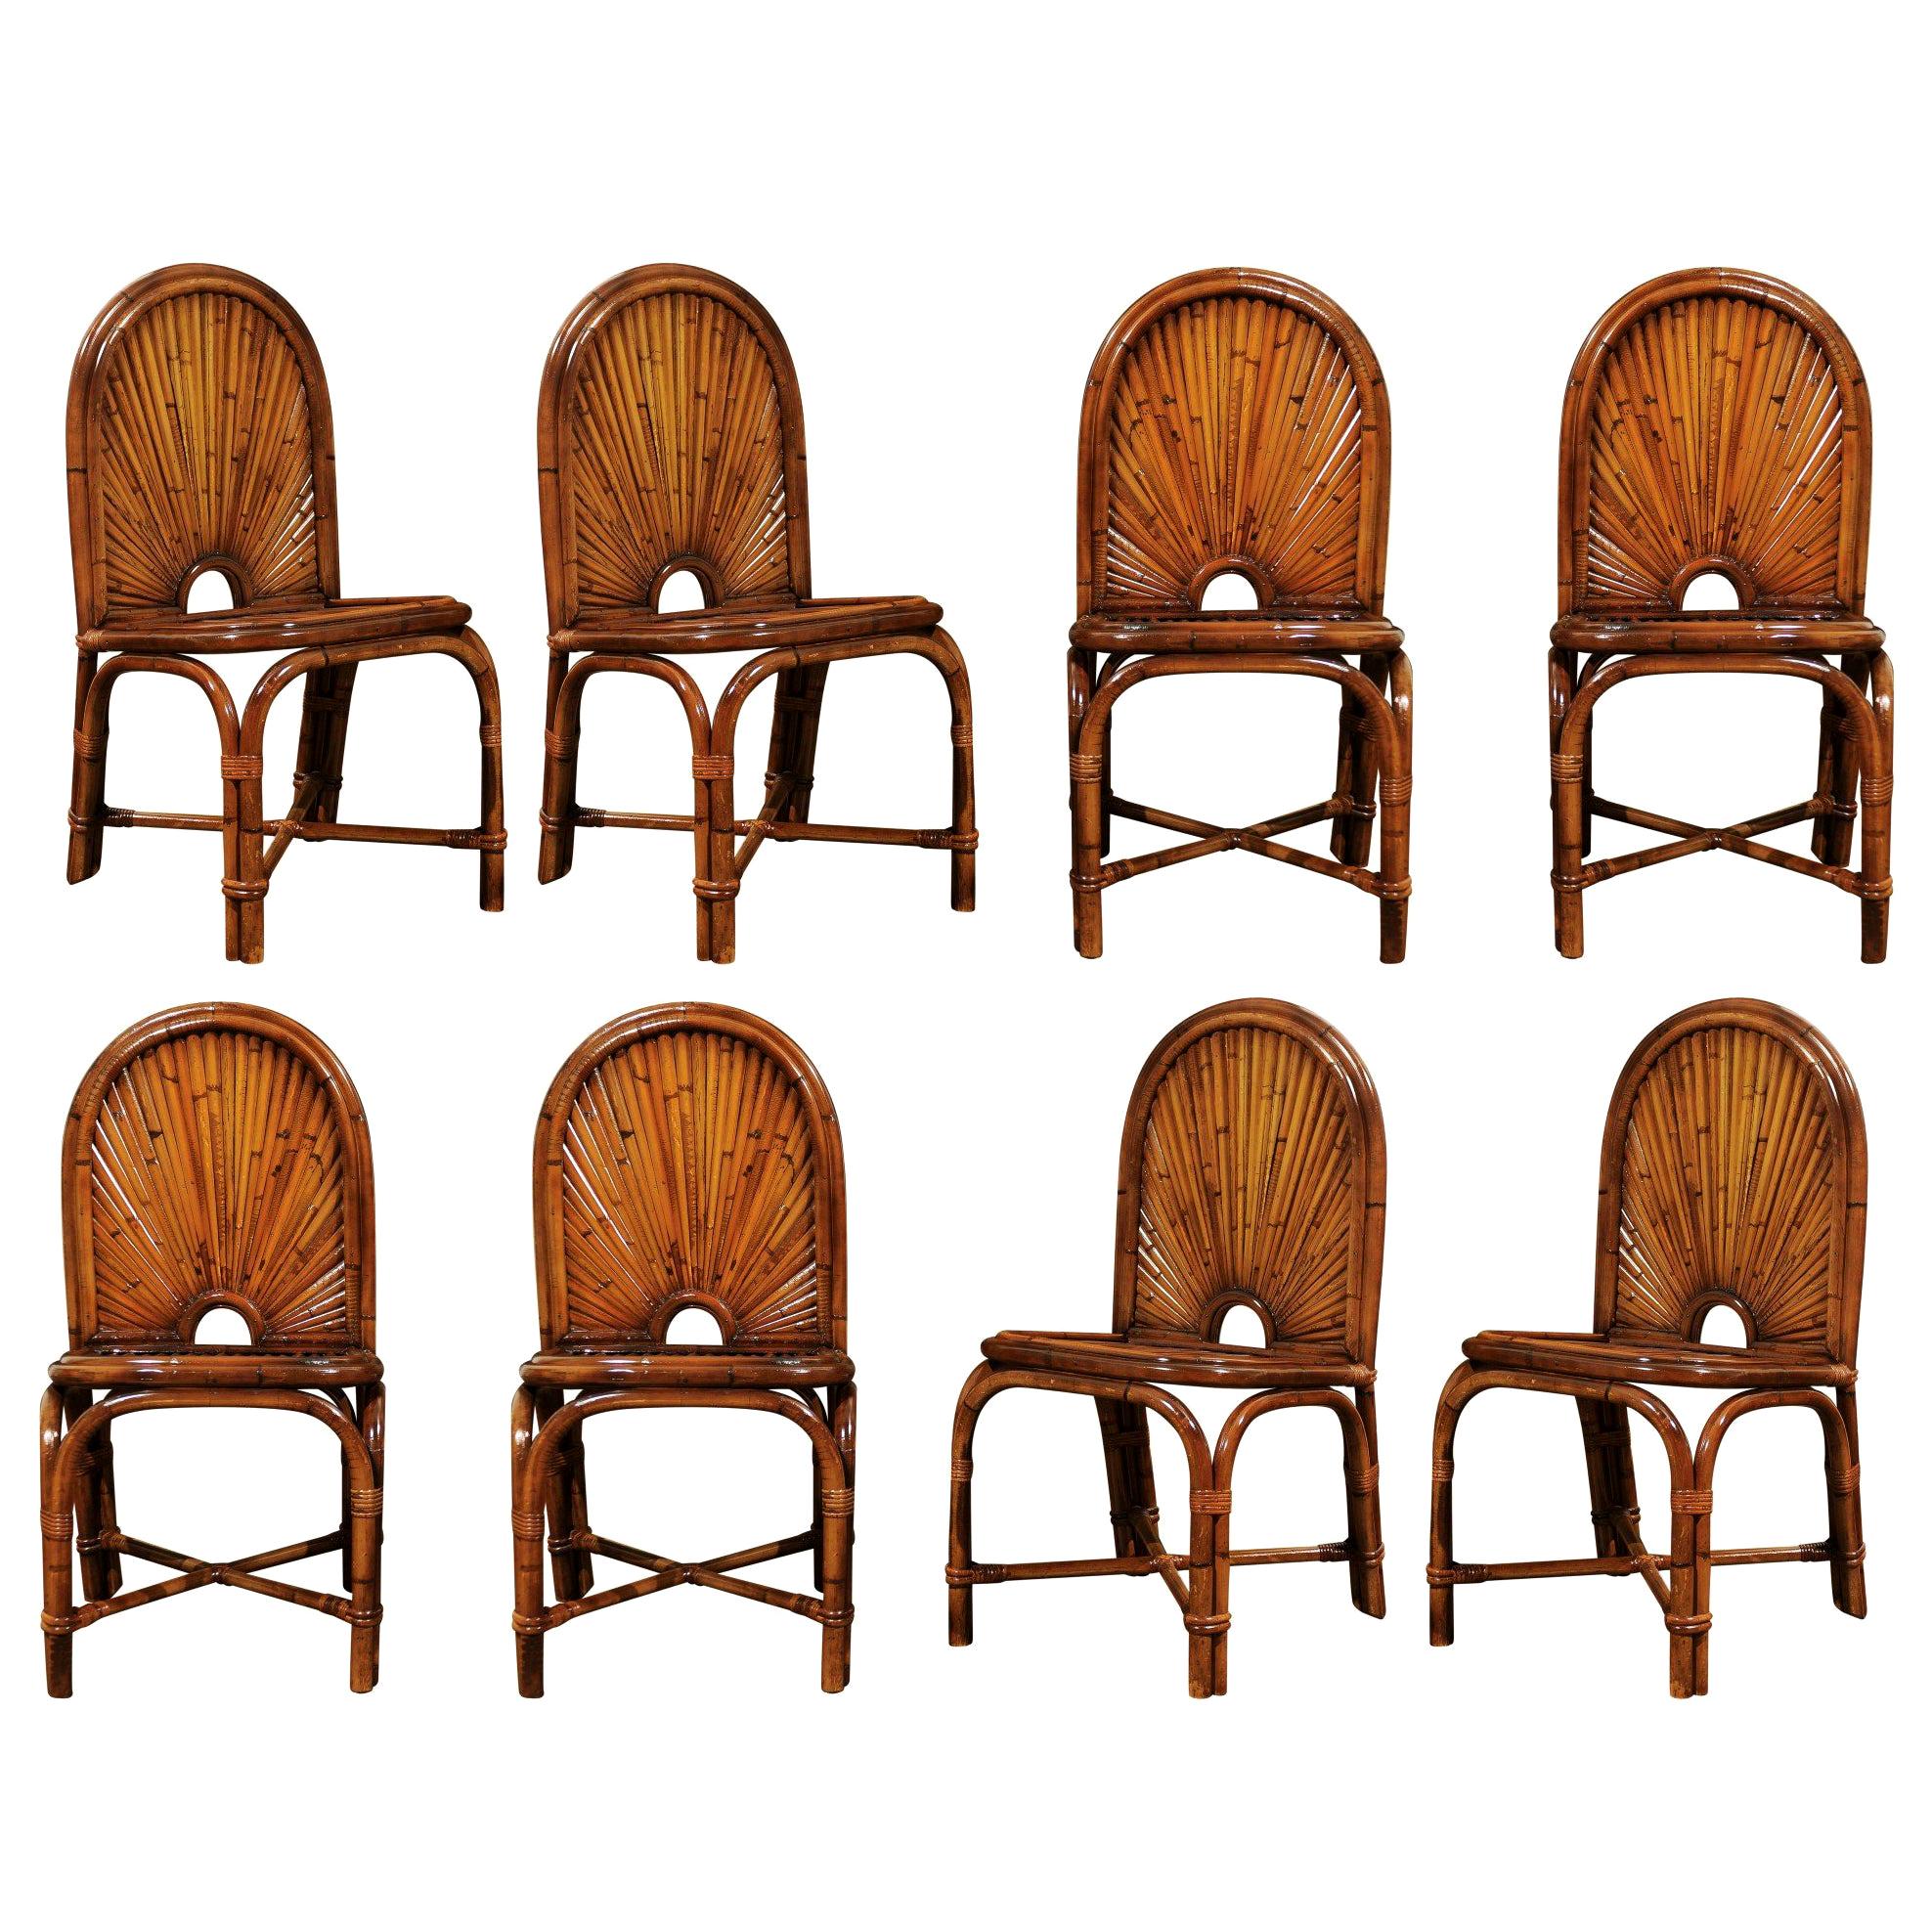 Spectacular Restored Set of Eight Rattan and Bamboo Dining Chairs, circa 1975